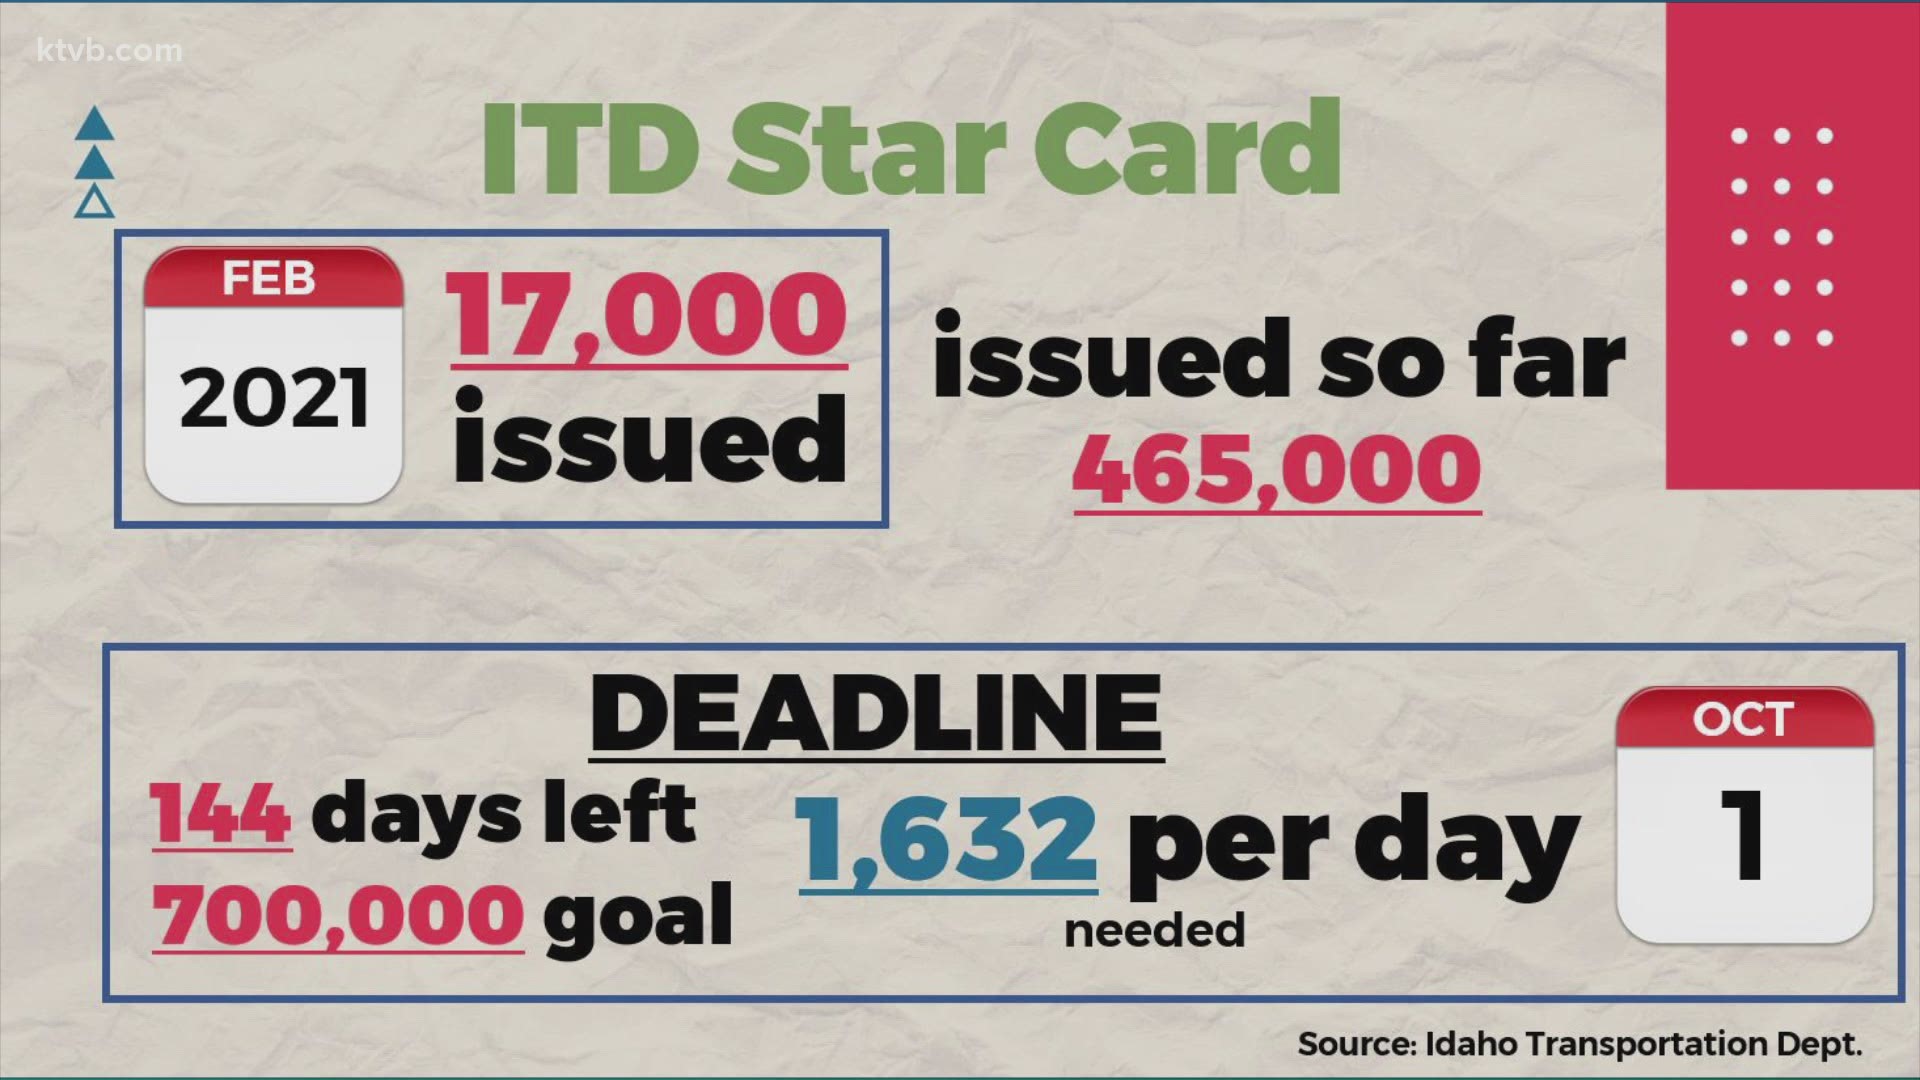 The Idaho Transportation Department hopes to issue 700,000 Star Cards by October 1, 2021.